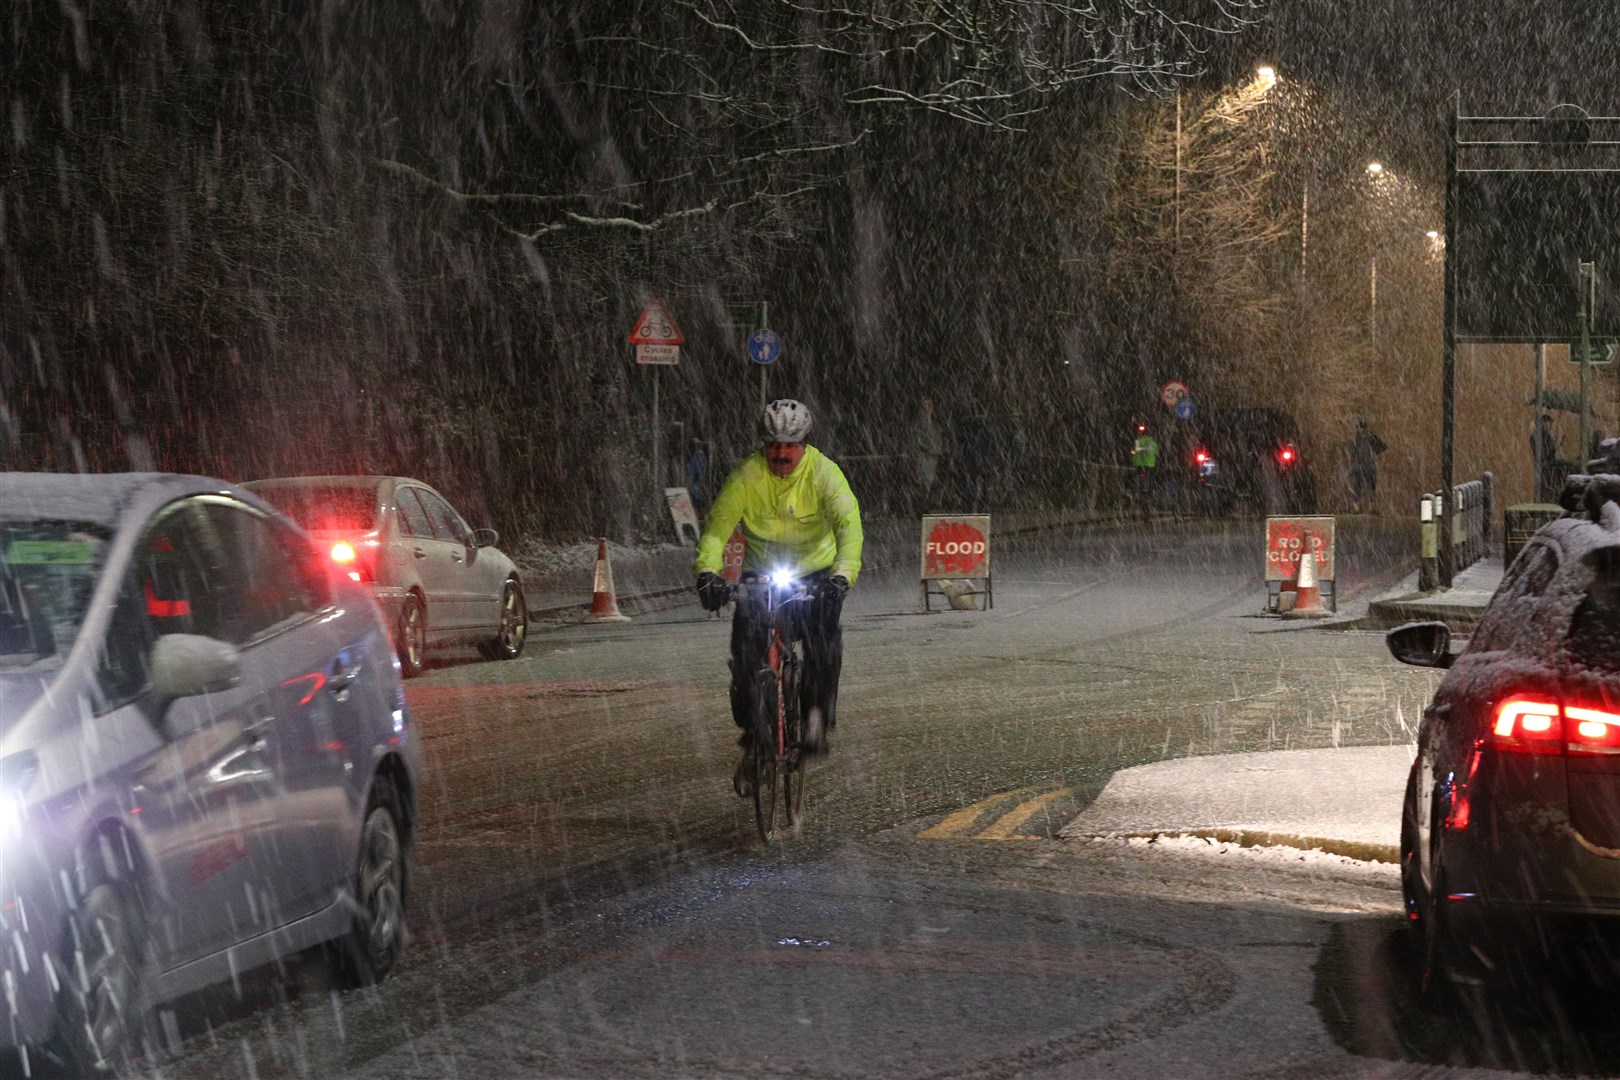 Snow falls in East Didsbury, Manchester, where homes are being evacuated due to risk of flooding (Peter Byrne/PA)